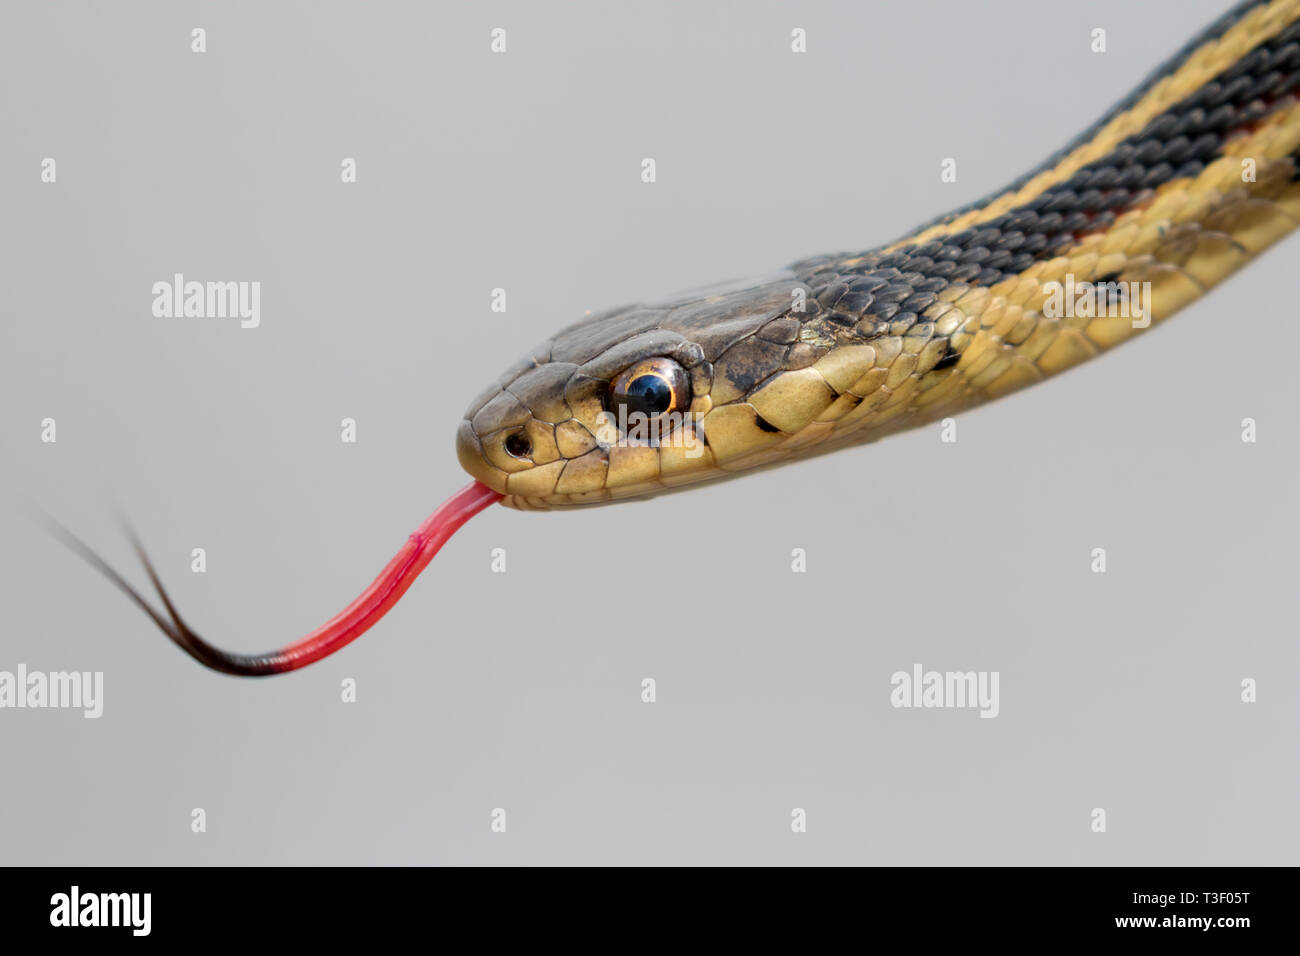 Common garter snake (Thamnophis sirtalis) with tongue out, close up Stock Photo